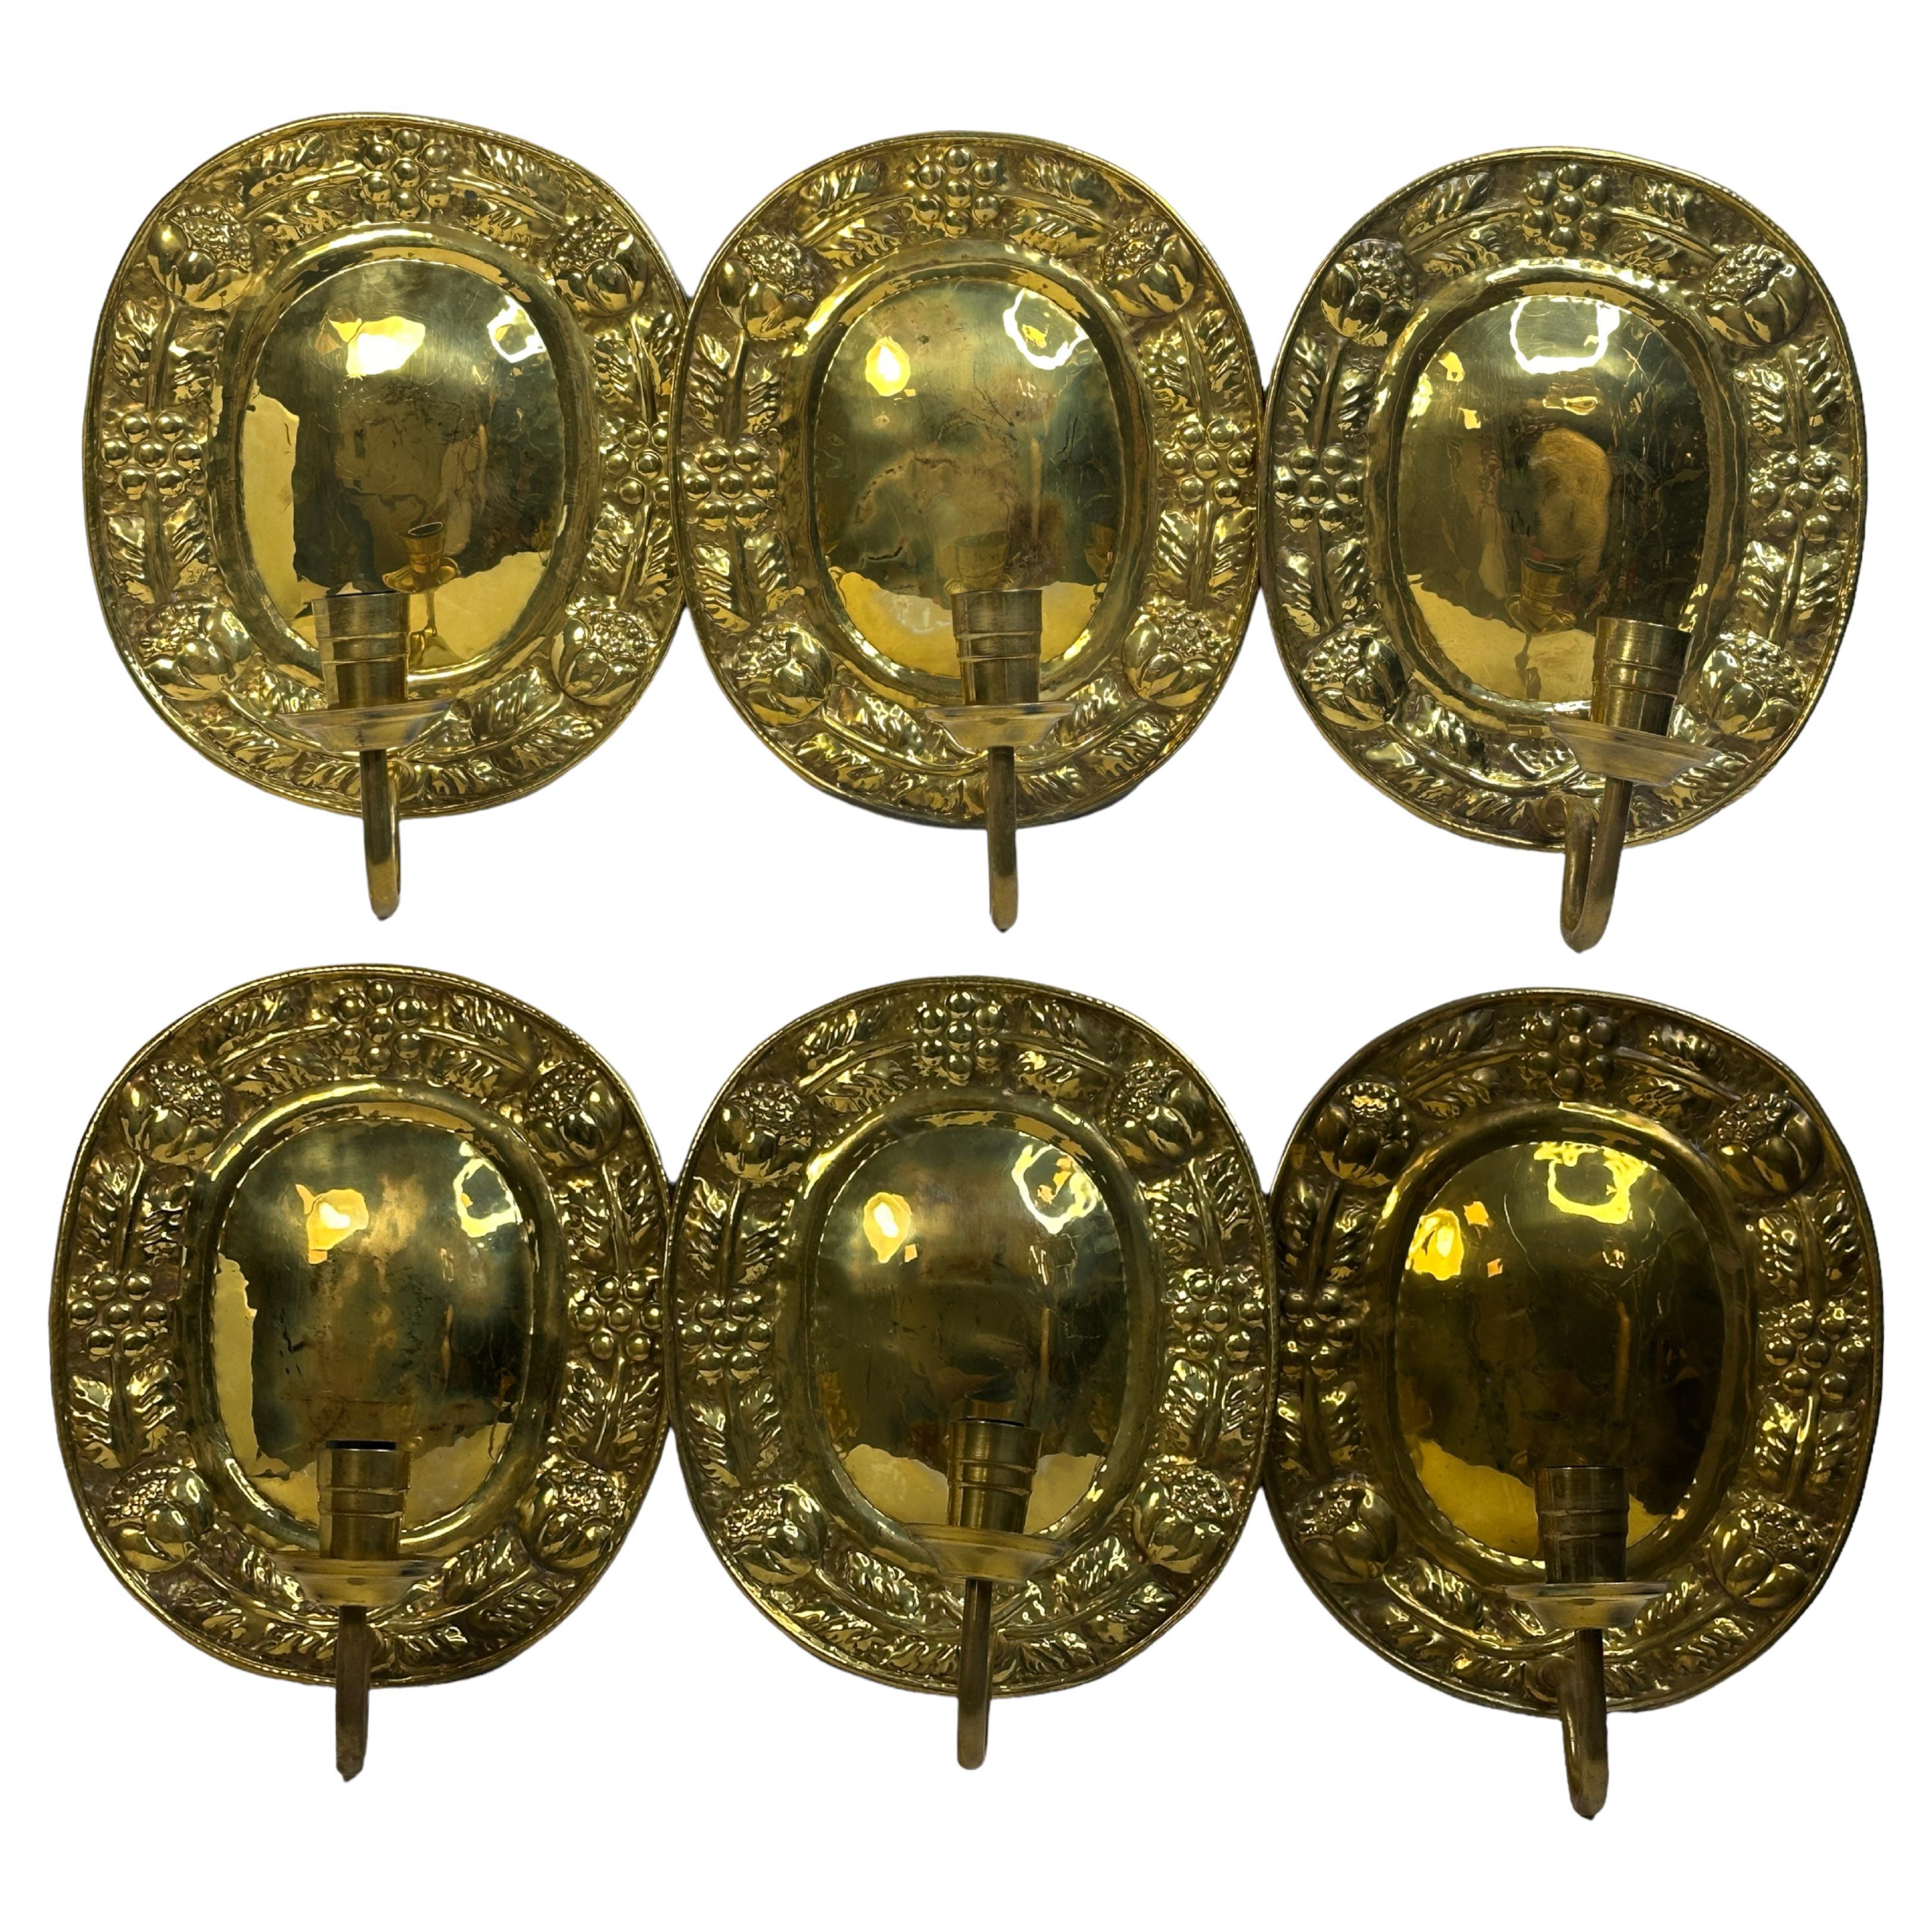 This is a set of six 1920s candle wall sconces, made to electrical use. Nice patina to the metal and an all original condition. Look at this nice details. They are so cute, the original patina gives them the antique charm and makes them very